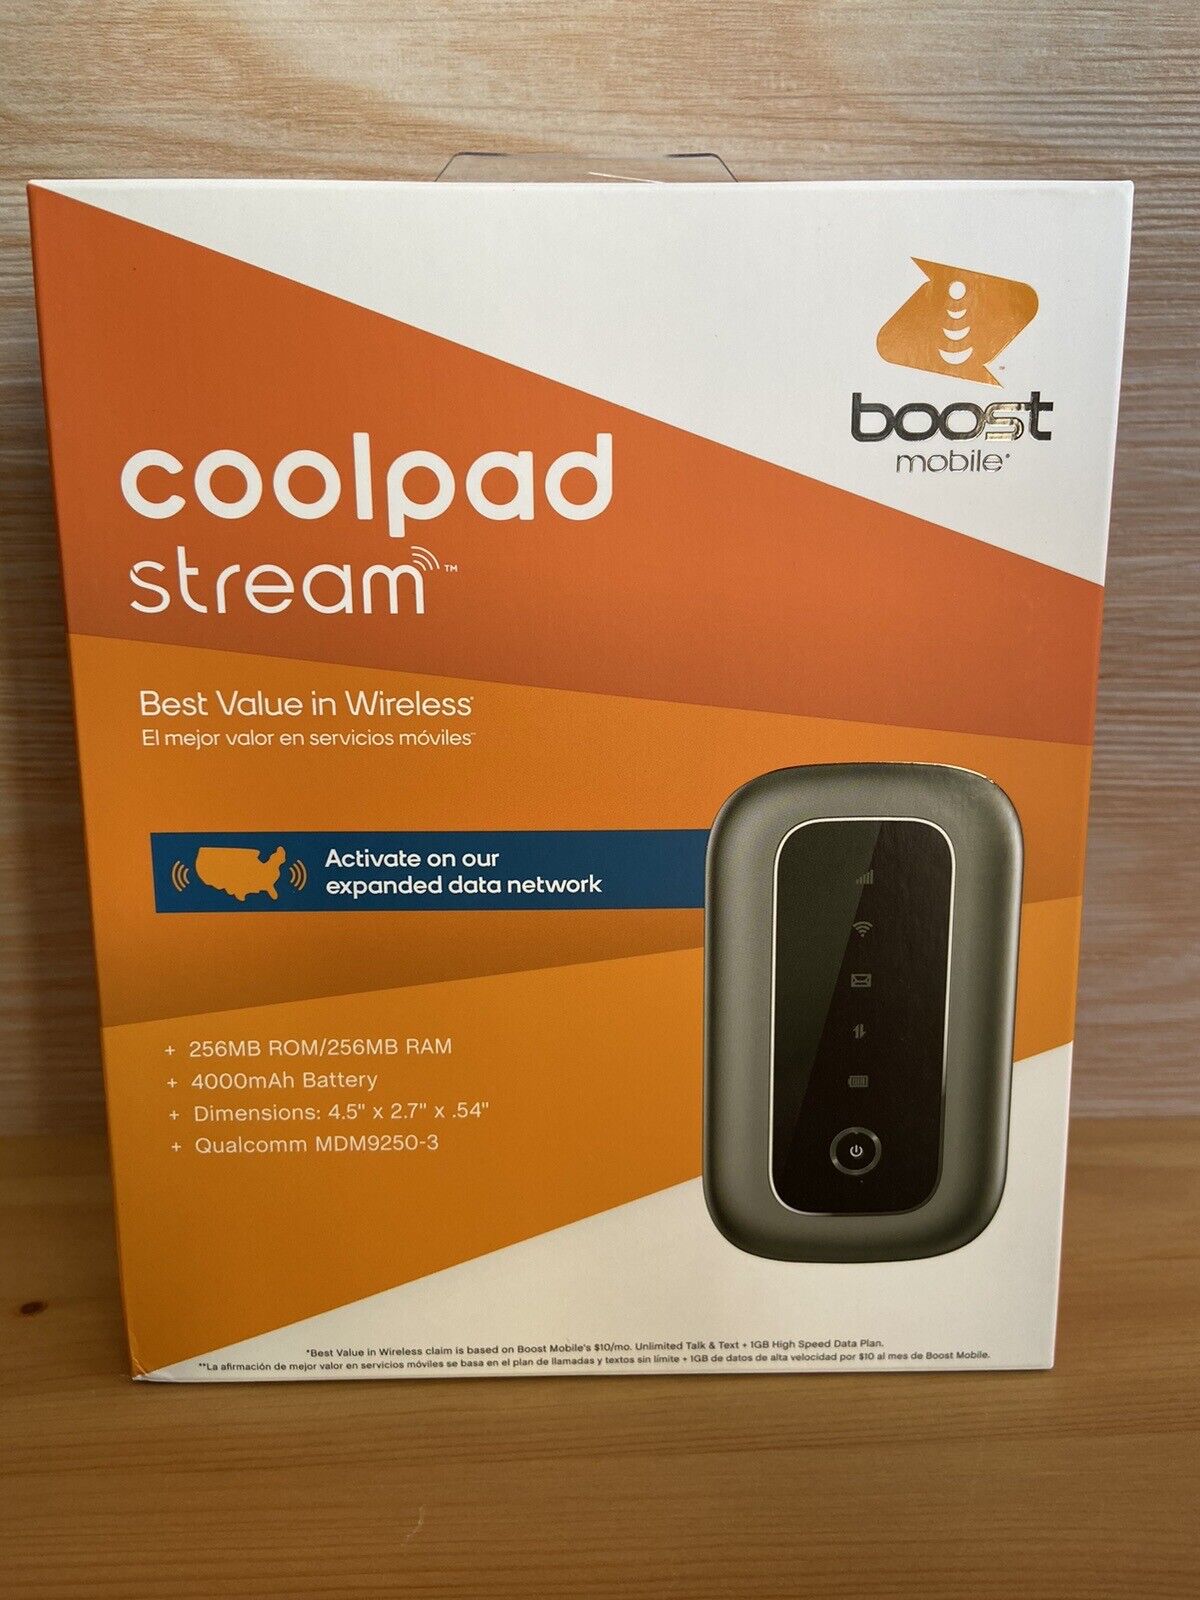 Boost Mobile Coolpad Stream 4G LTE Extended Range WiFi Hot Spot Prepaid - SEALED